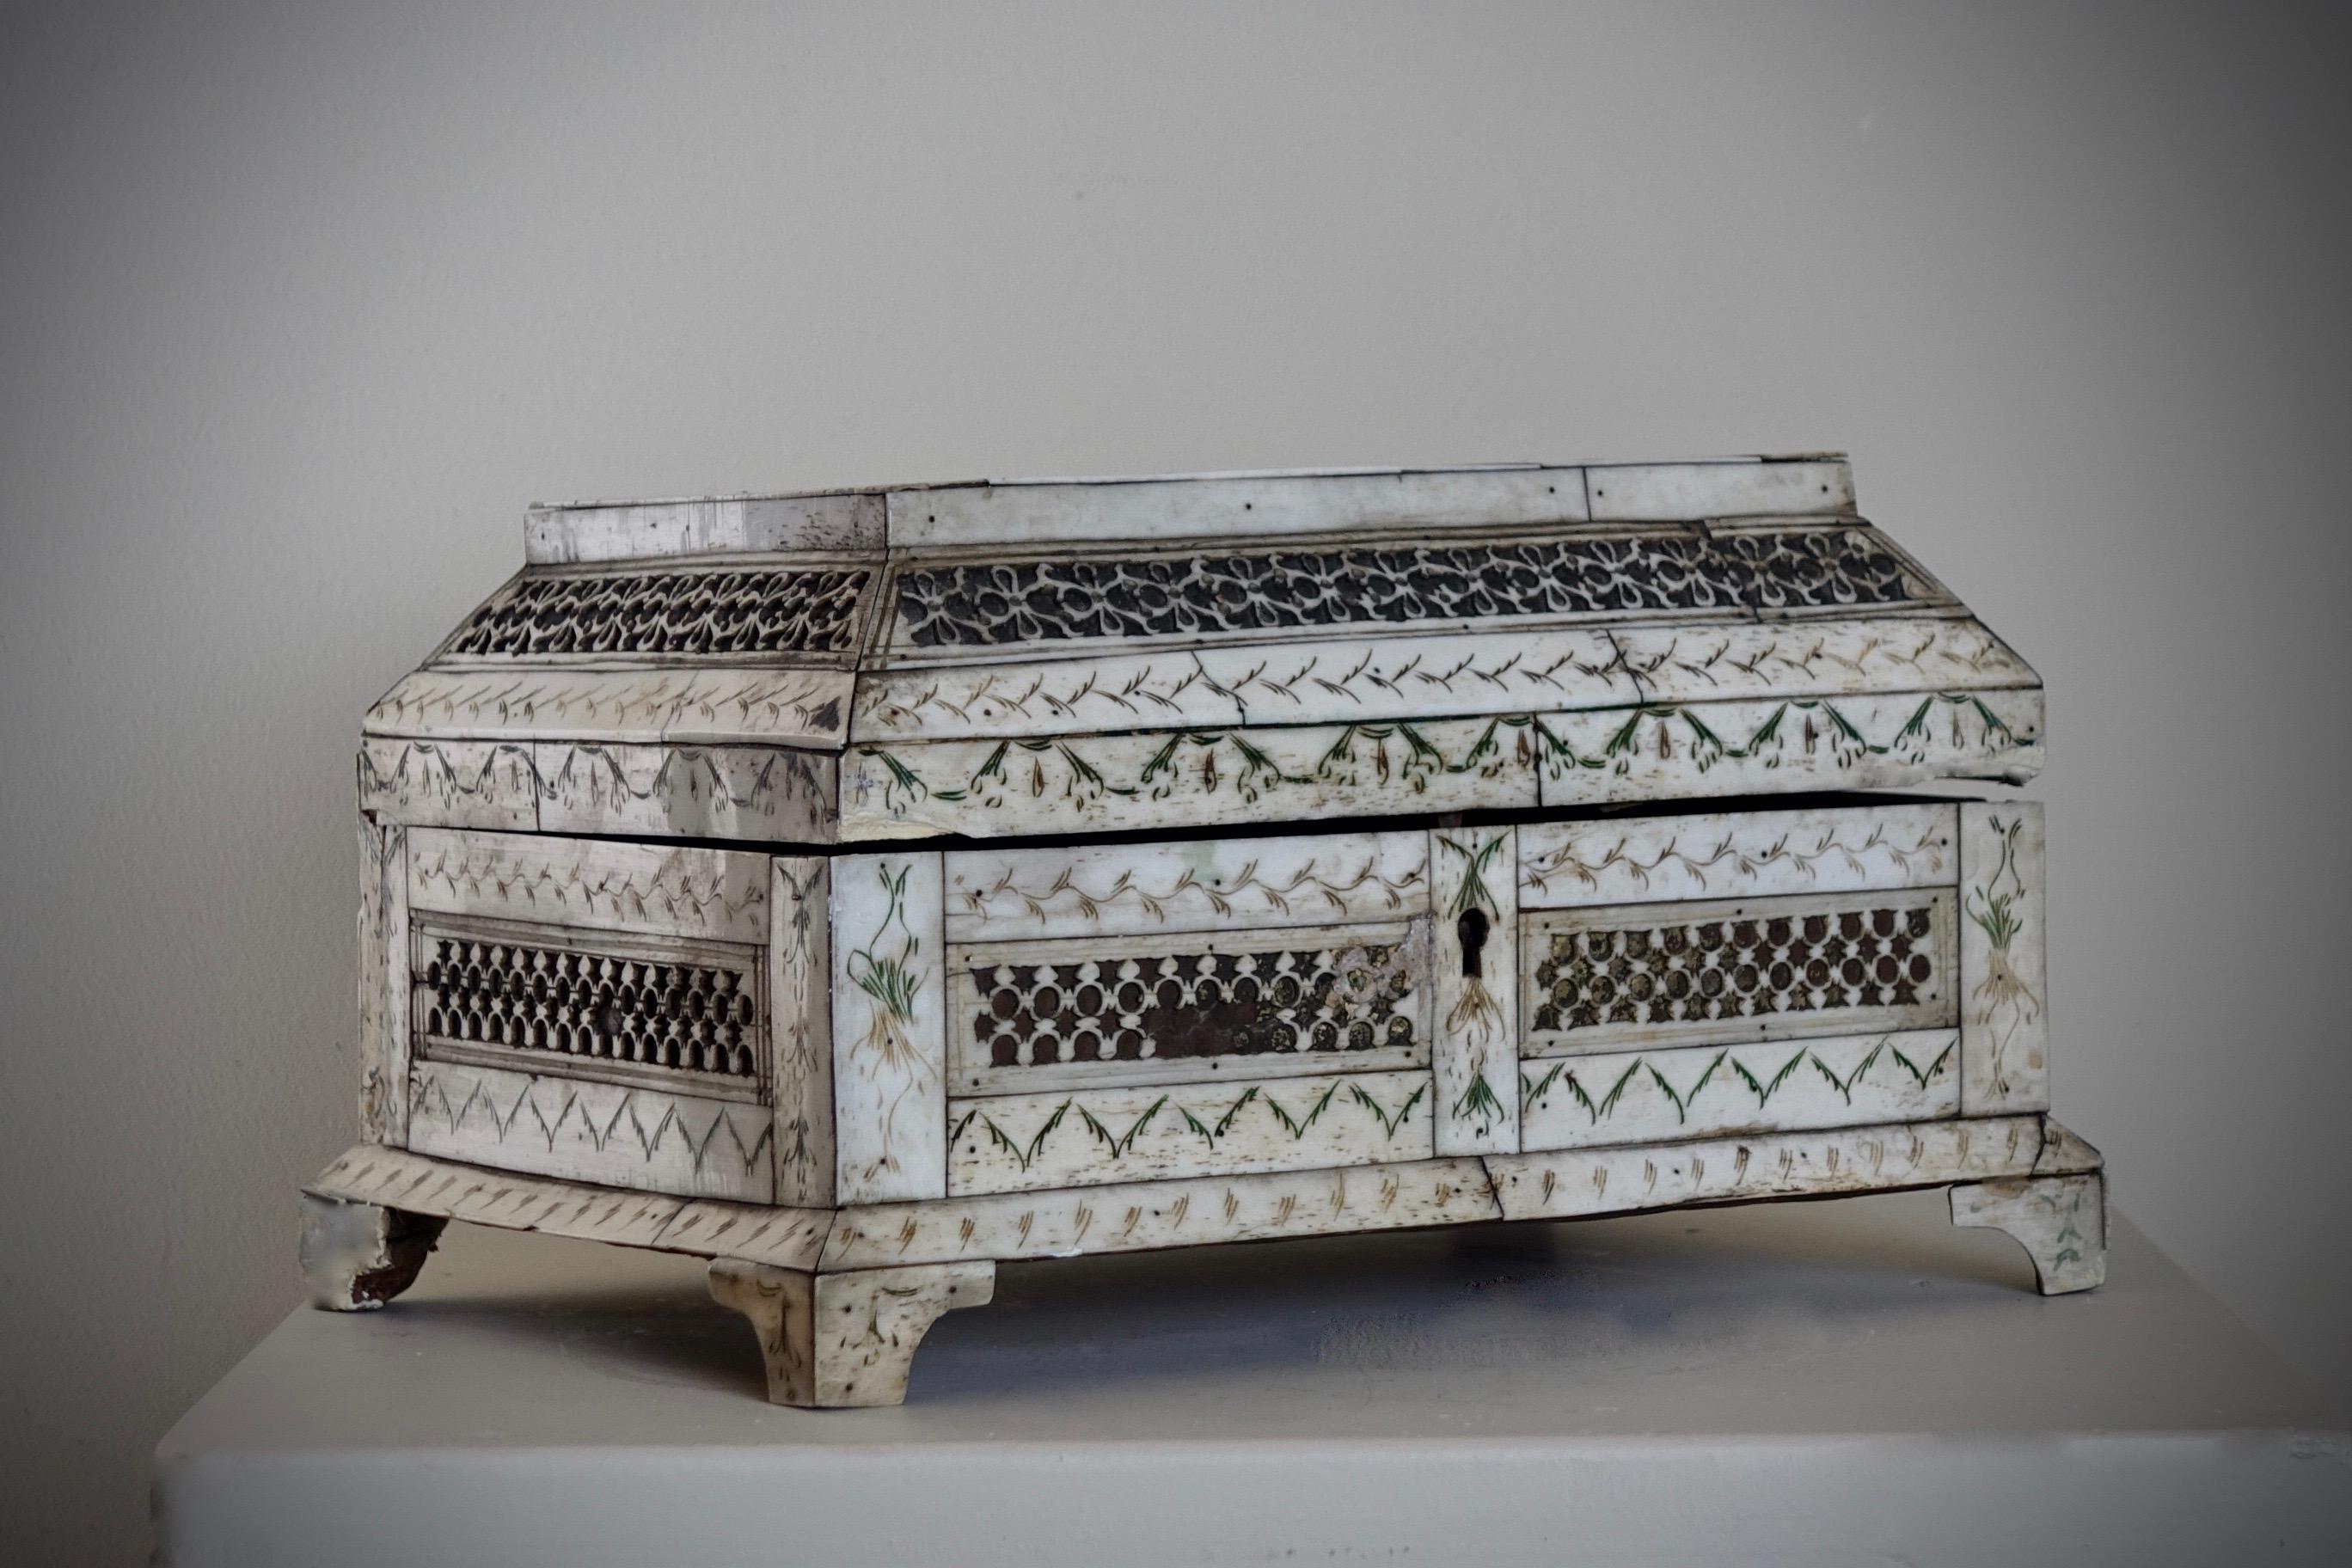 Russian Carved bone table box
Carved bone table box
North of Russia, 18th century
12,5 x  23,2 x 7 cm

Rectangular box with a wooden core in bone veneer decorated with geometric friezes and painted foliage.

The decoration is typical of the